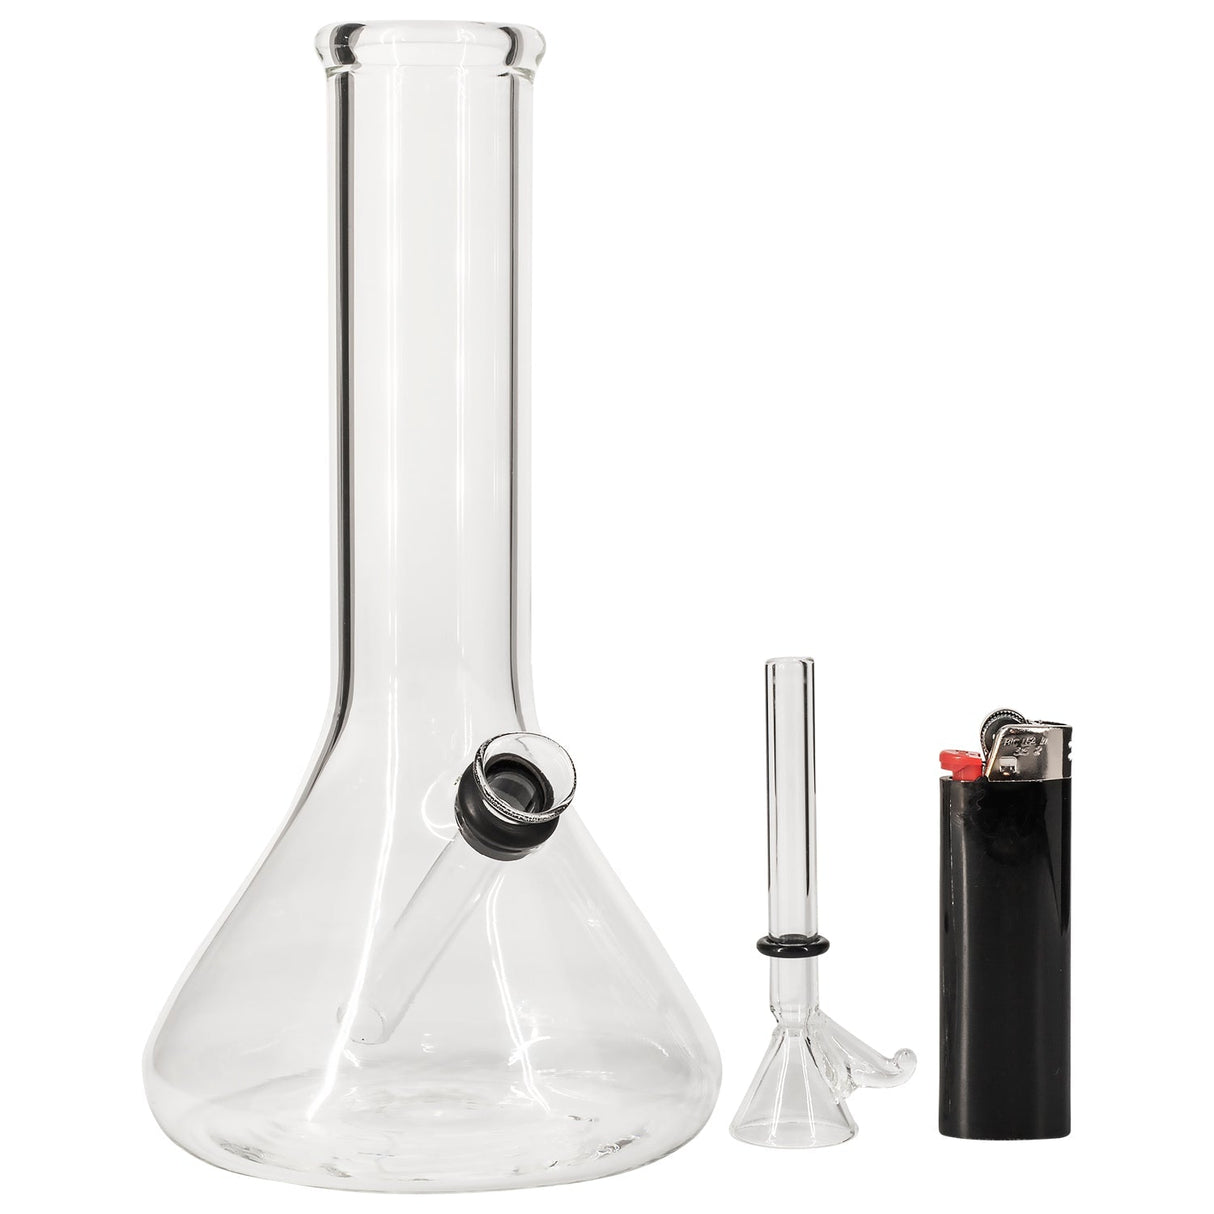 LA Pipes Beaker Base Bong with thick borosilicate glass, side view, next to lighter for scale